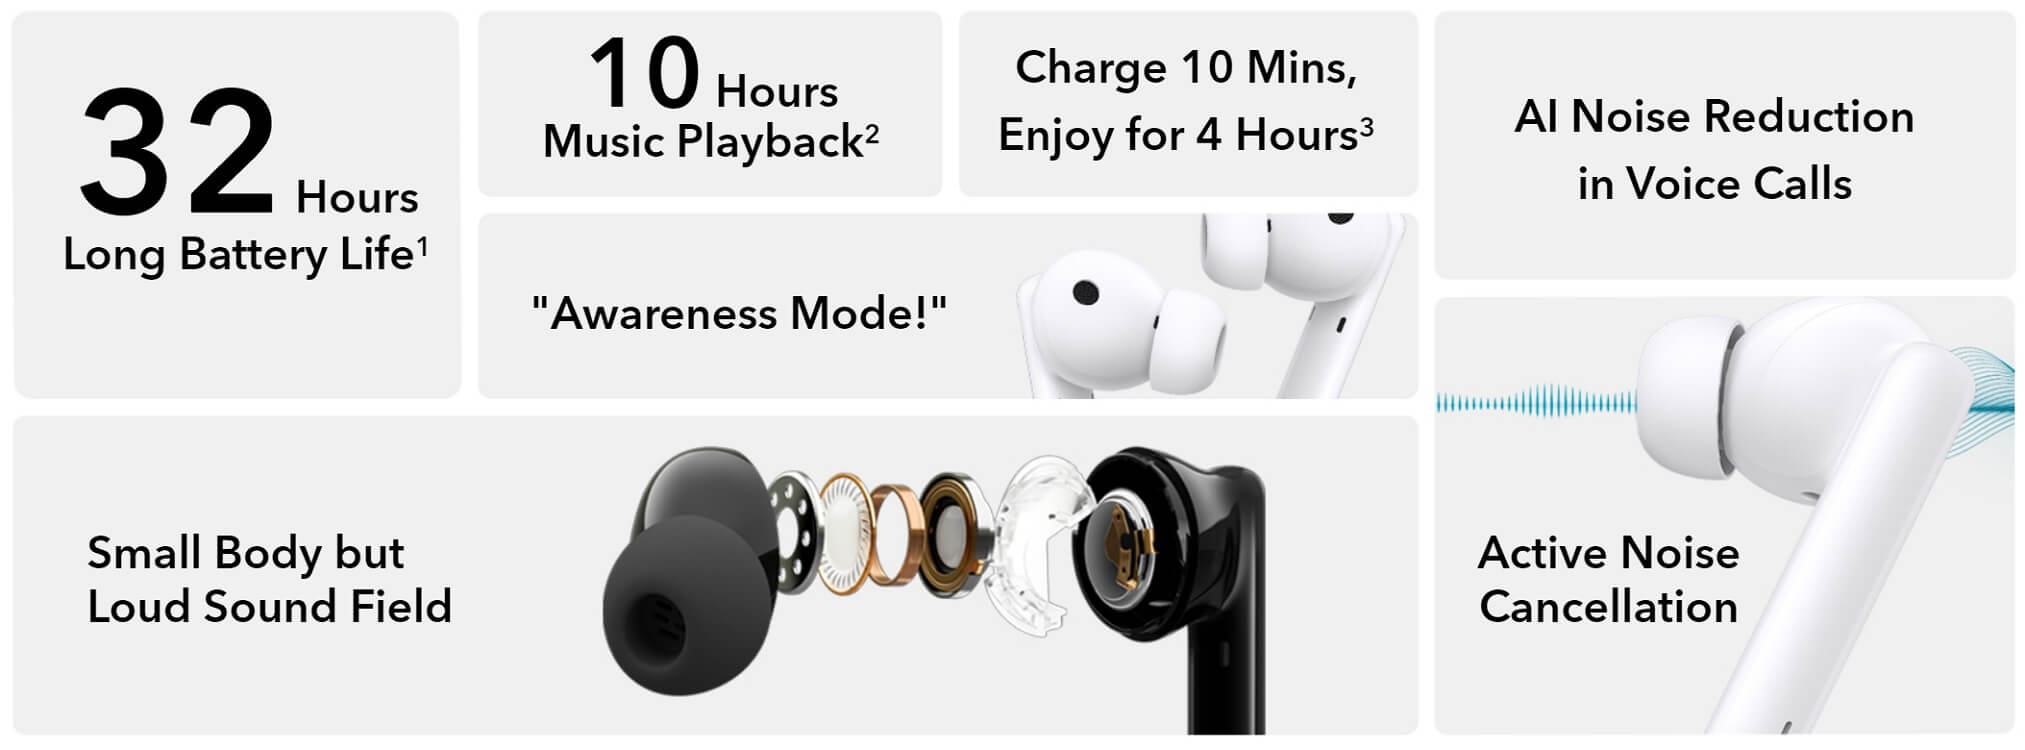 HONOR Earbuds 2 Lite features